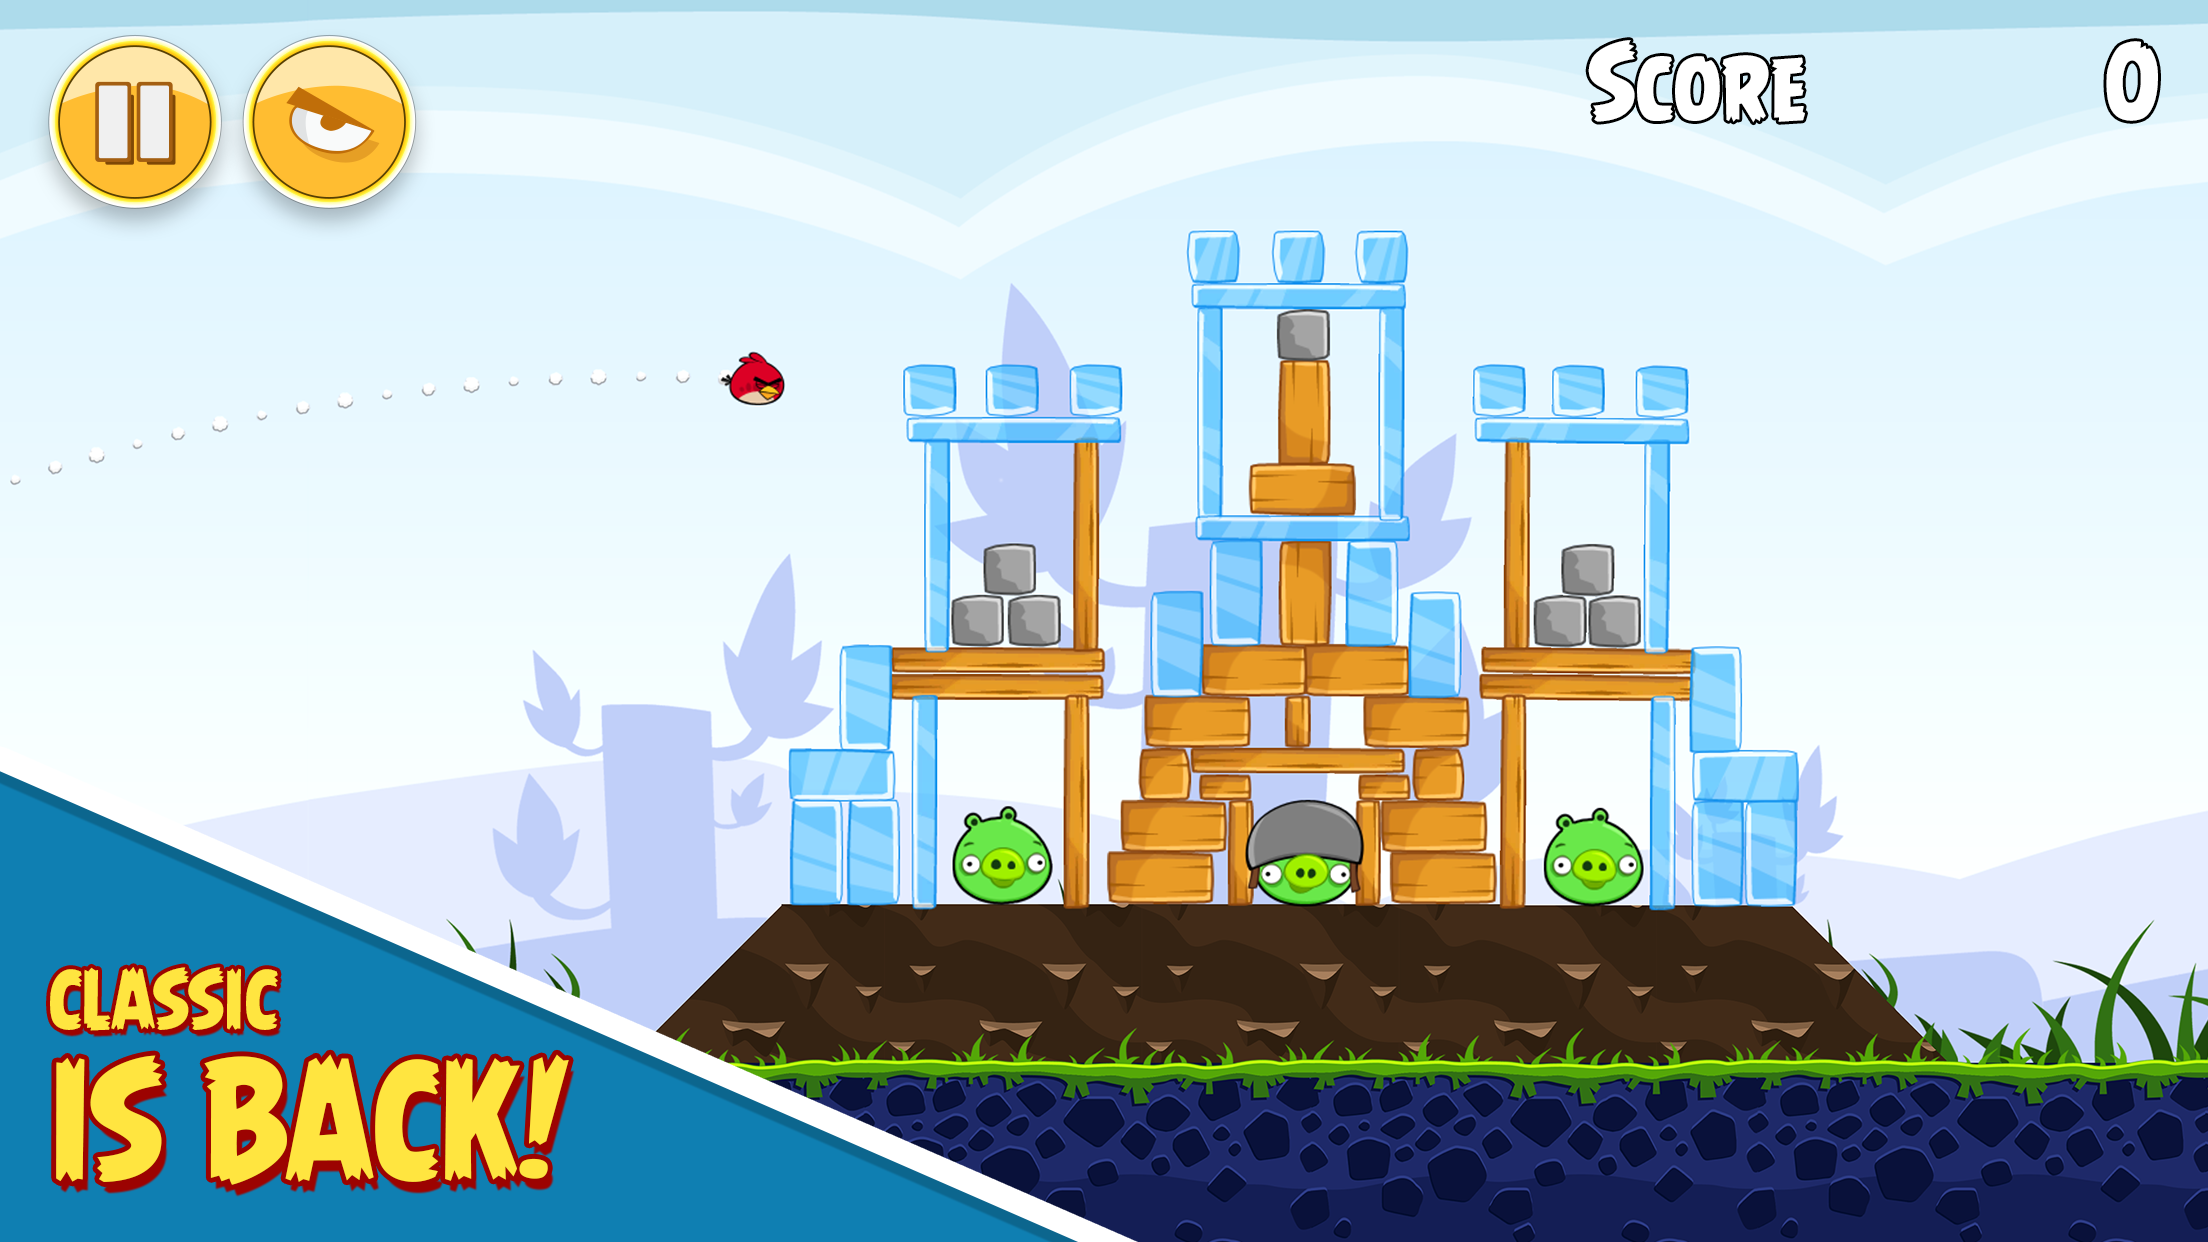 Angry Birds best games of all time roundup (2)